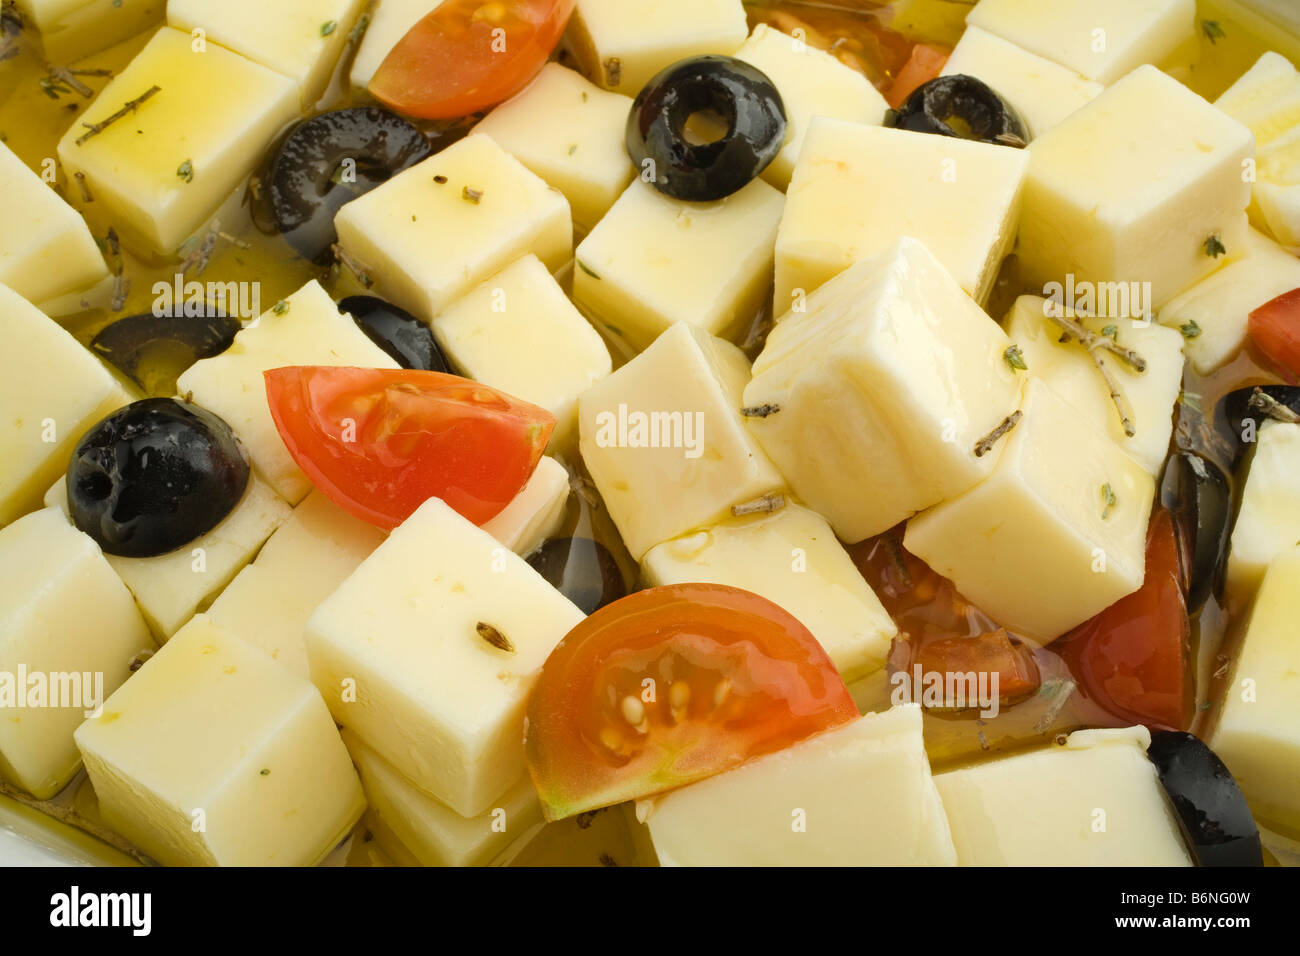 queso tomillo tomate y aceitunas en aceite de oliva virgen extra thyme cheese with tomato and olives in extra virgin olive oil Stock Photo